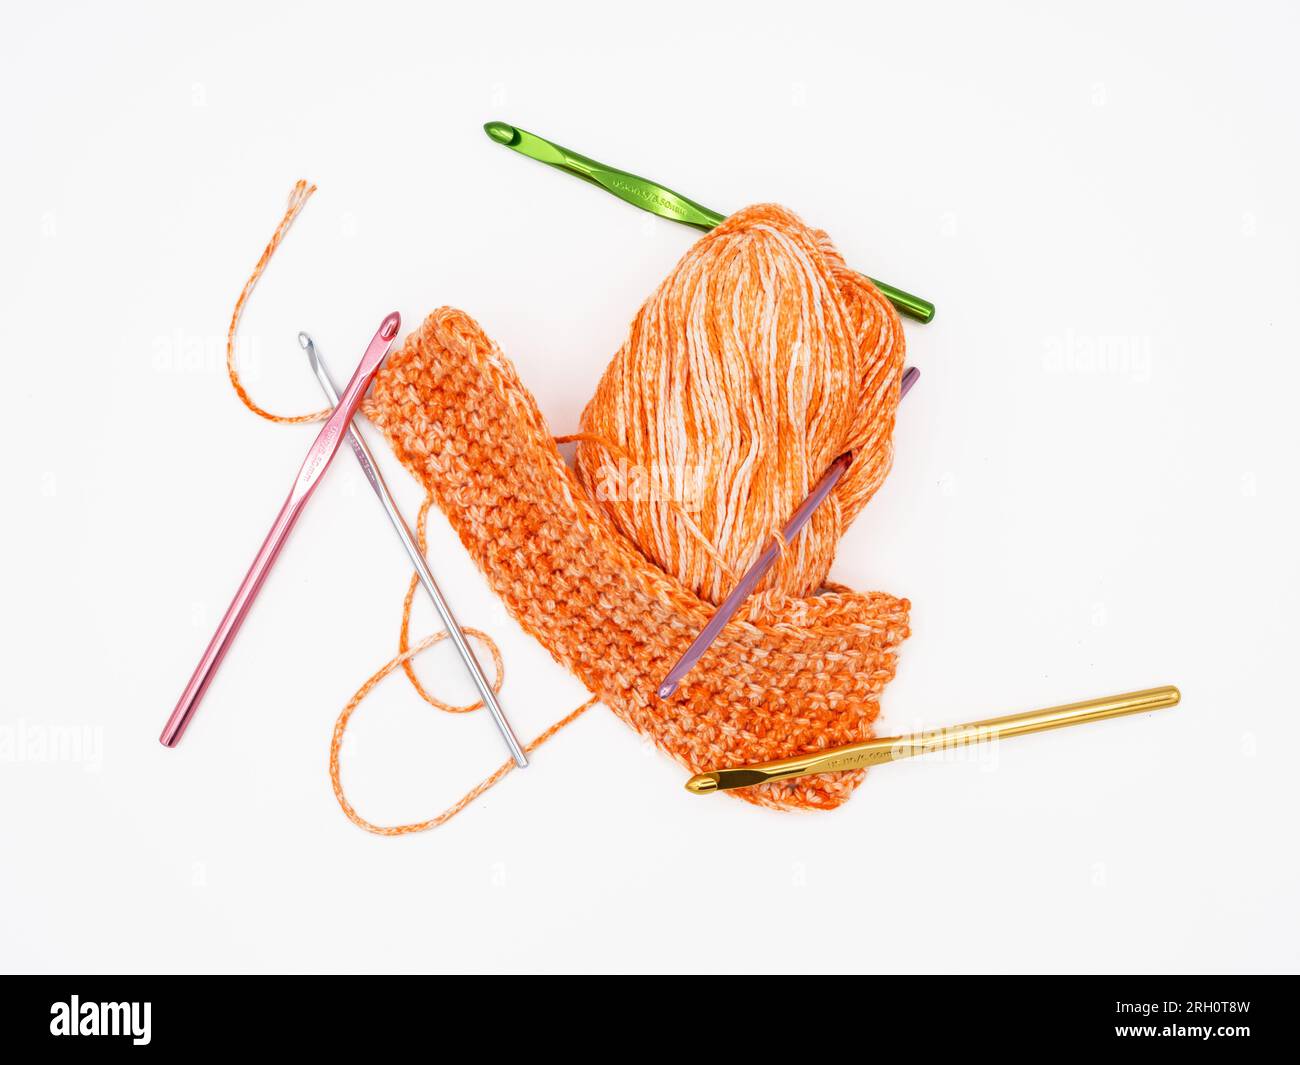 On a white background, there's pumpkin-colored yarn alongside multiple crochet hooks in assorted colors, all isolated. Stock Photo